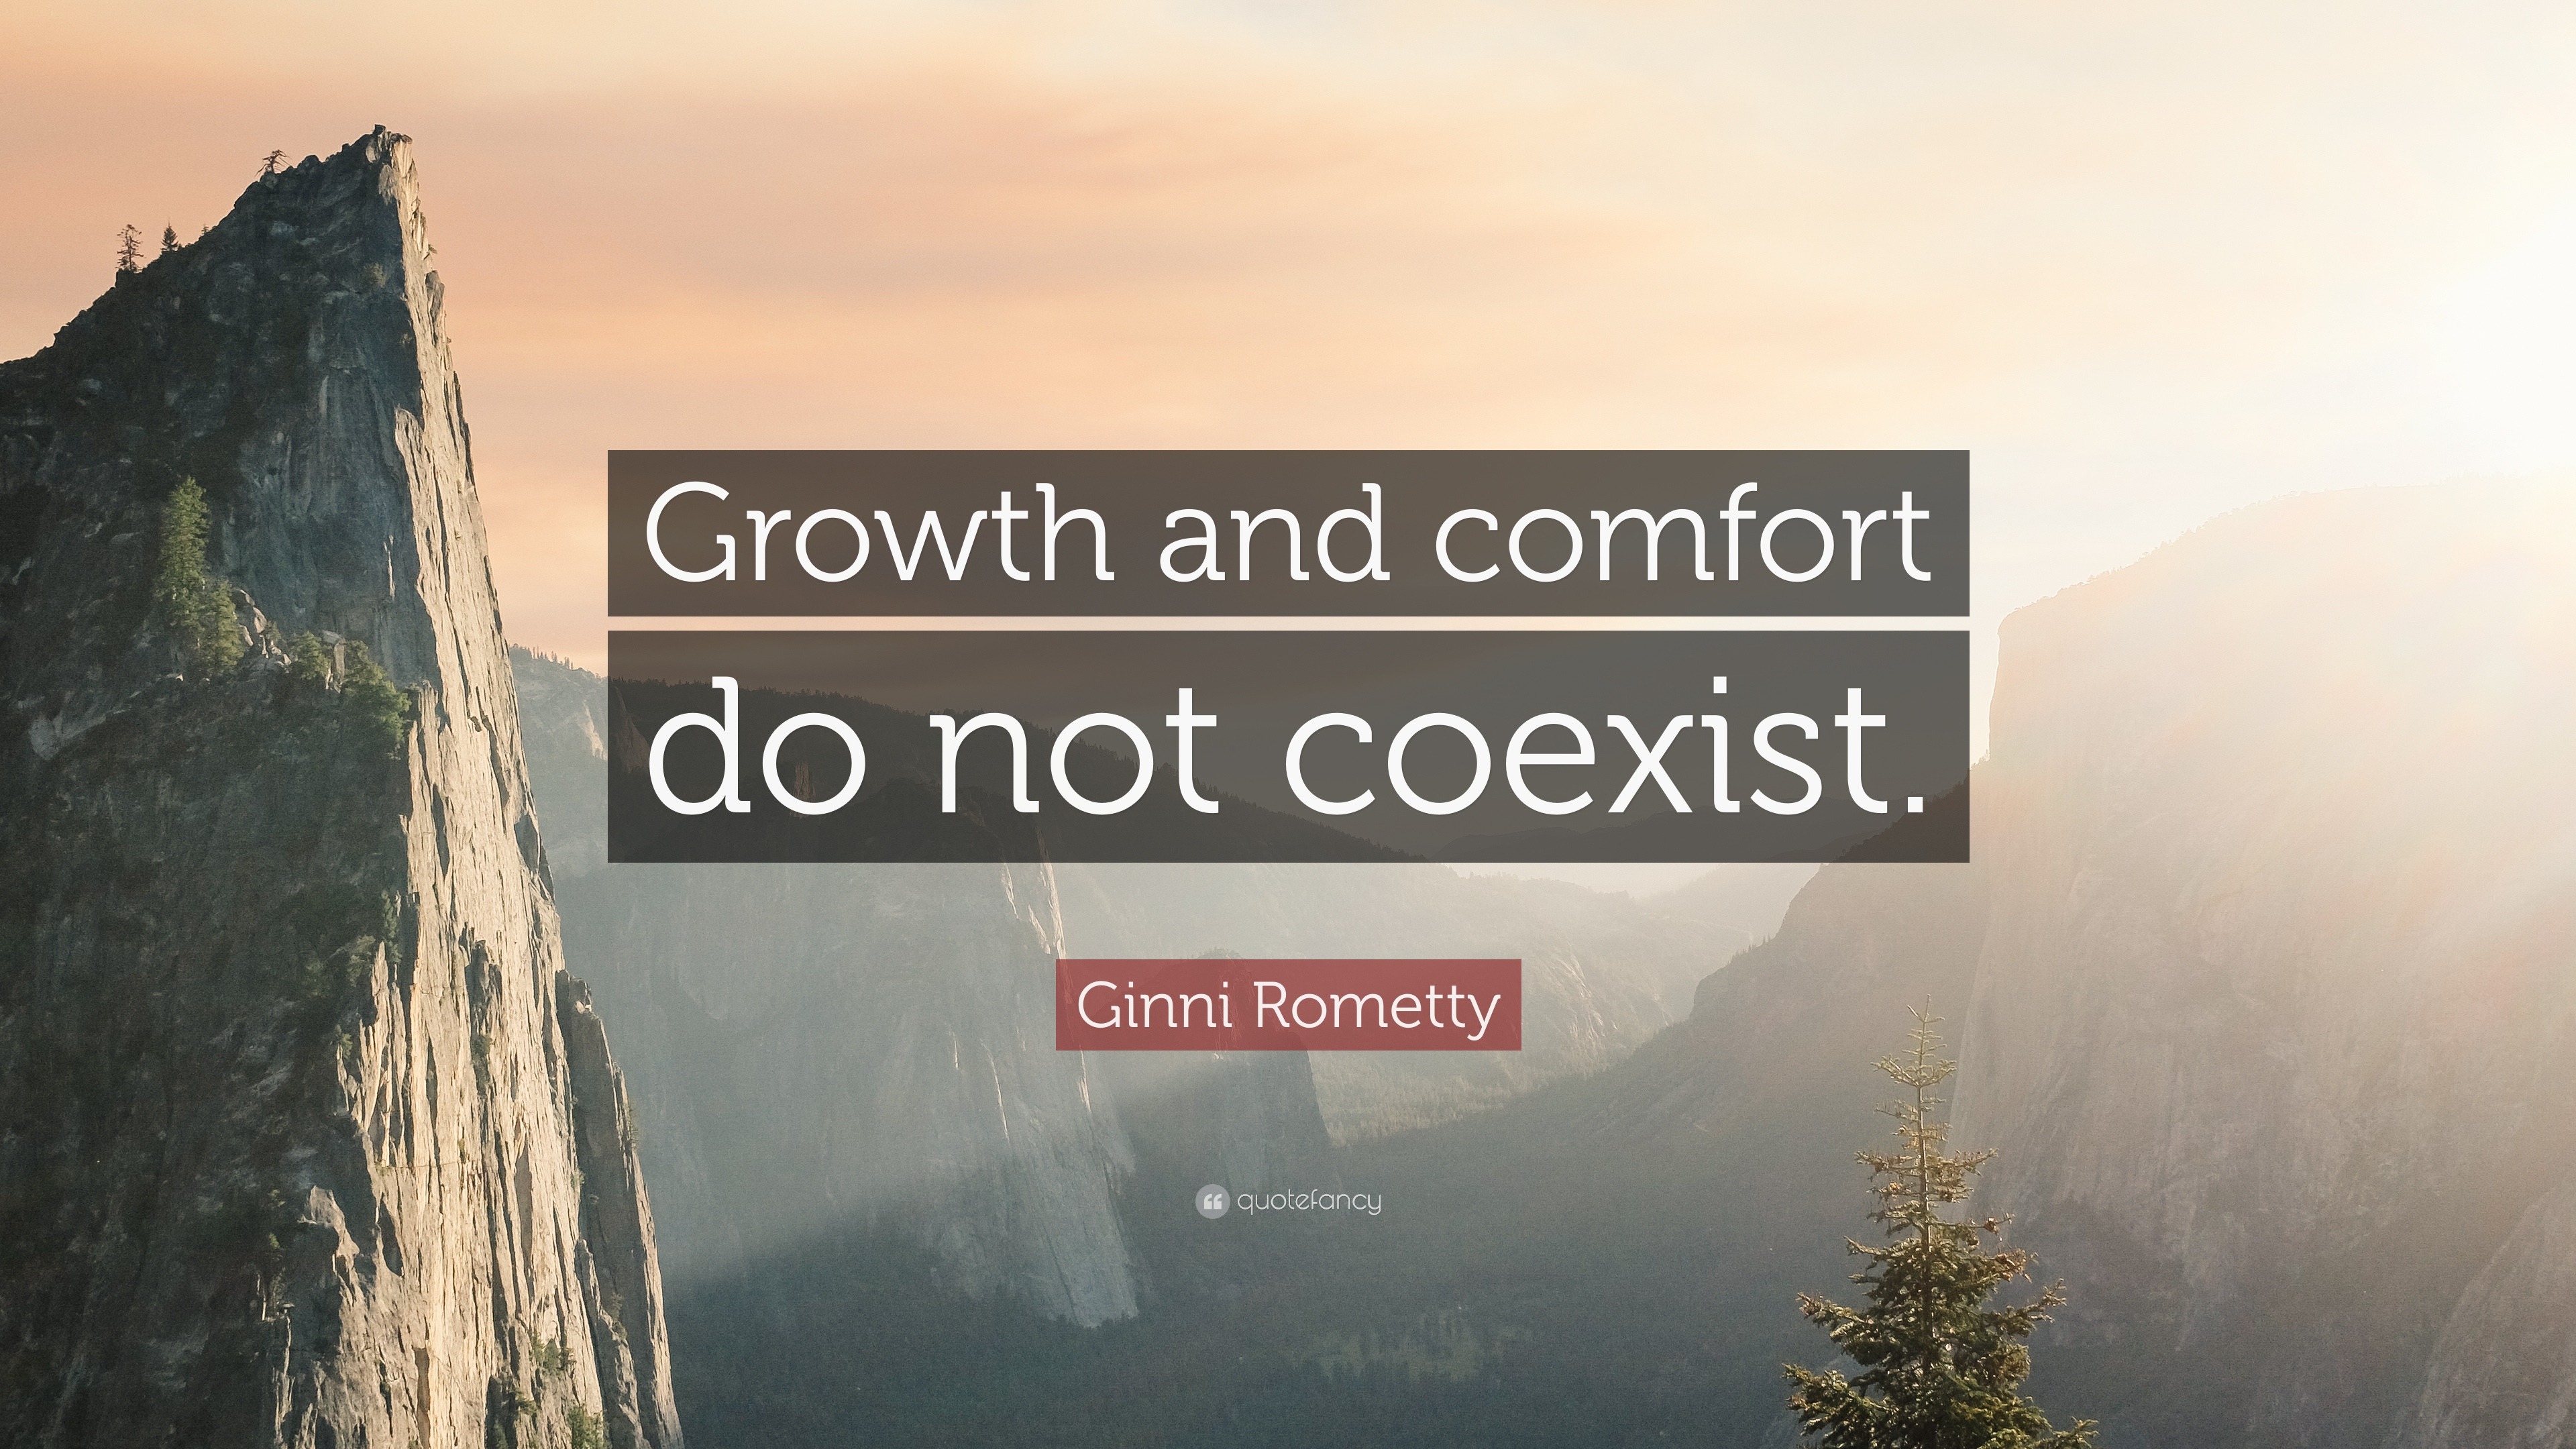 Ginni Rometty Quote: “Growth and comfort do not coexist.”